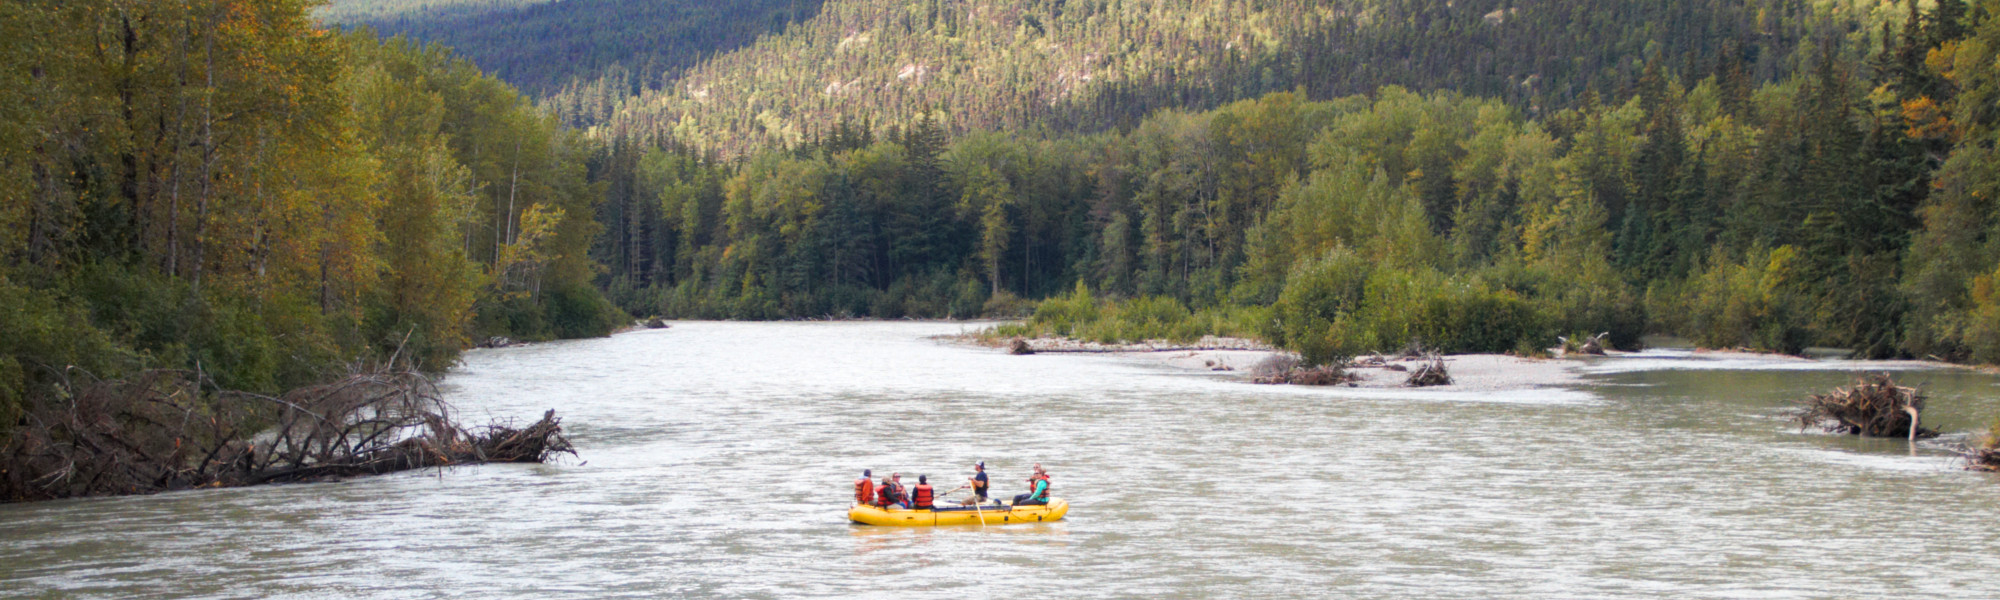 Rafting on the Taiya River alongside the historic Chilkoot Trail